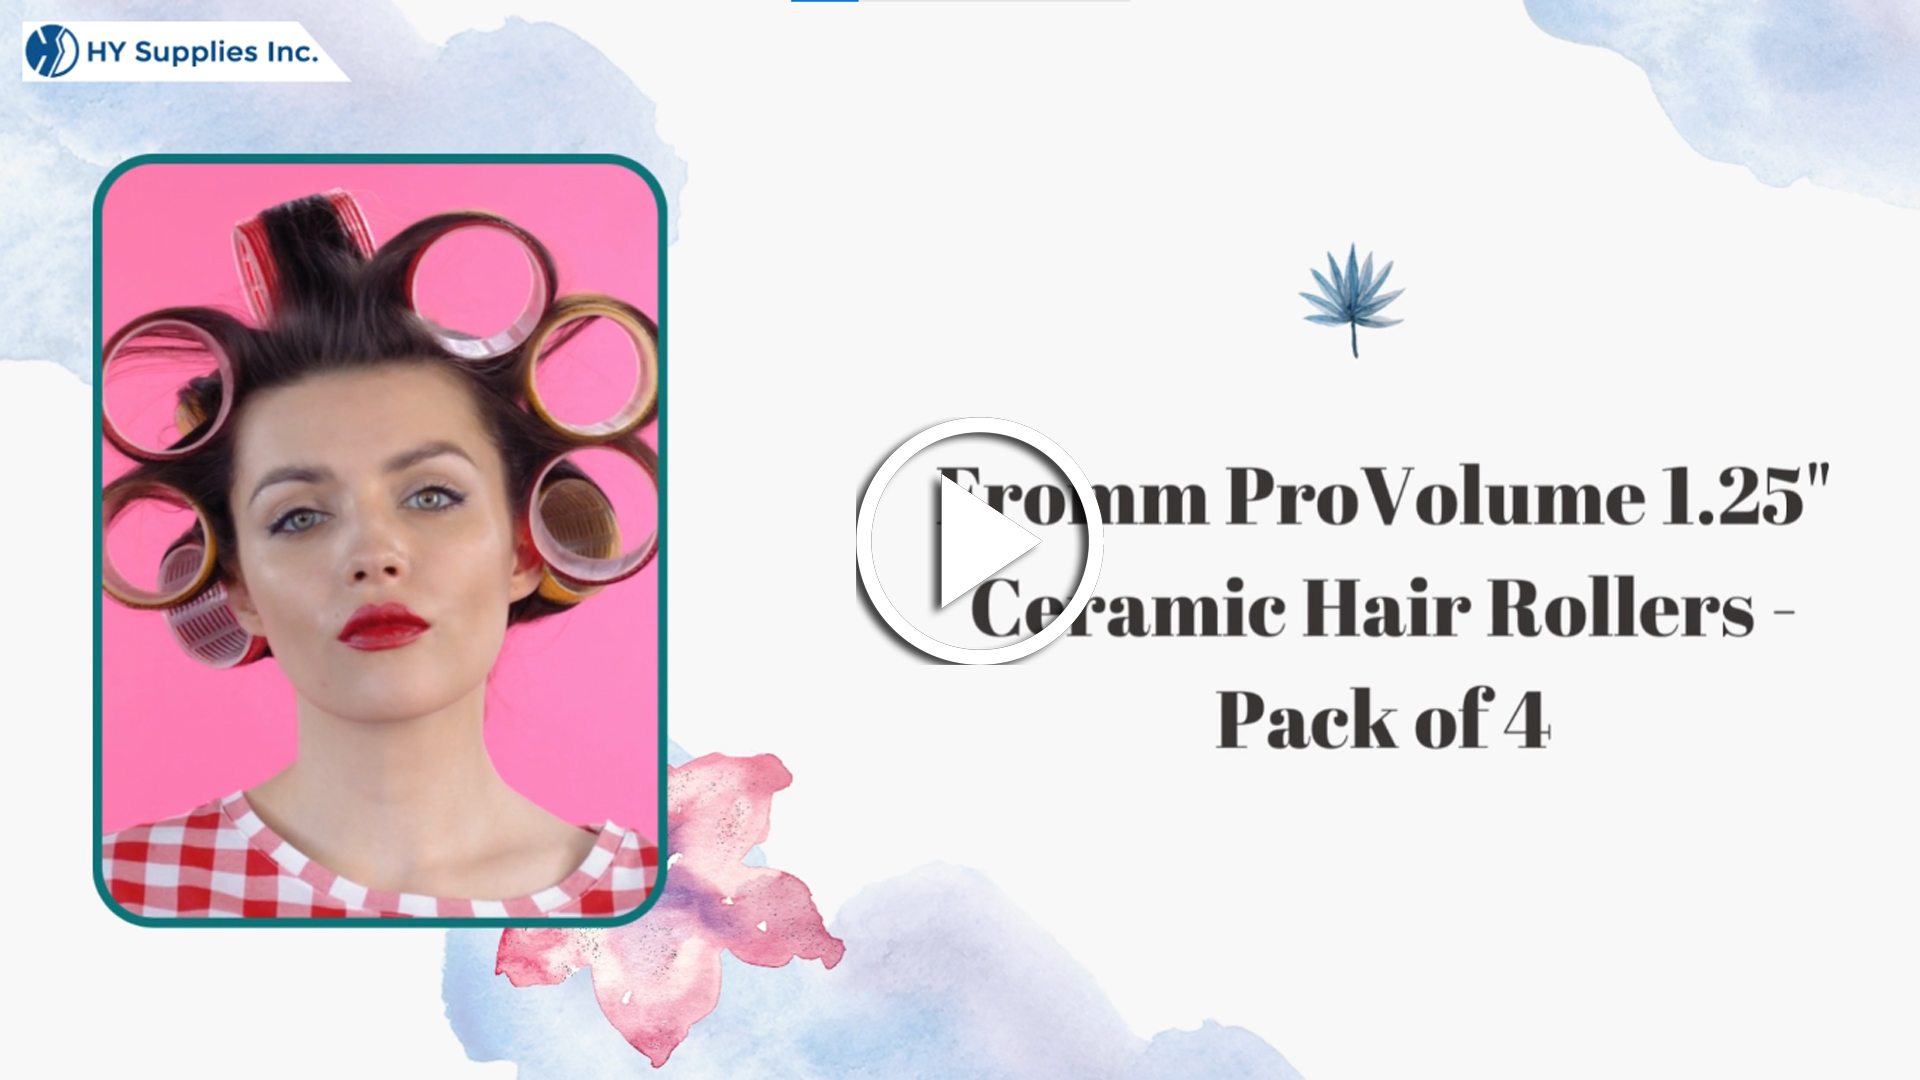 Fromm ProVolume 1.25" Ceramic Hair Rollers - Pack of 4